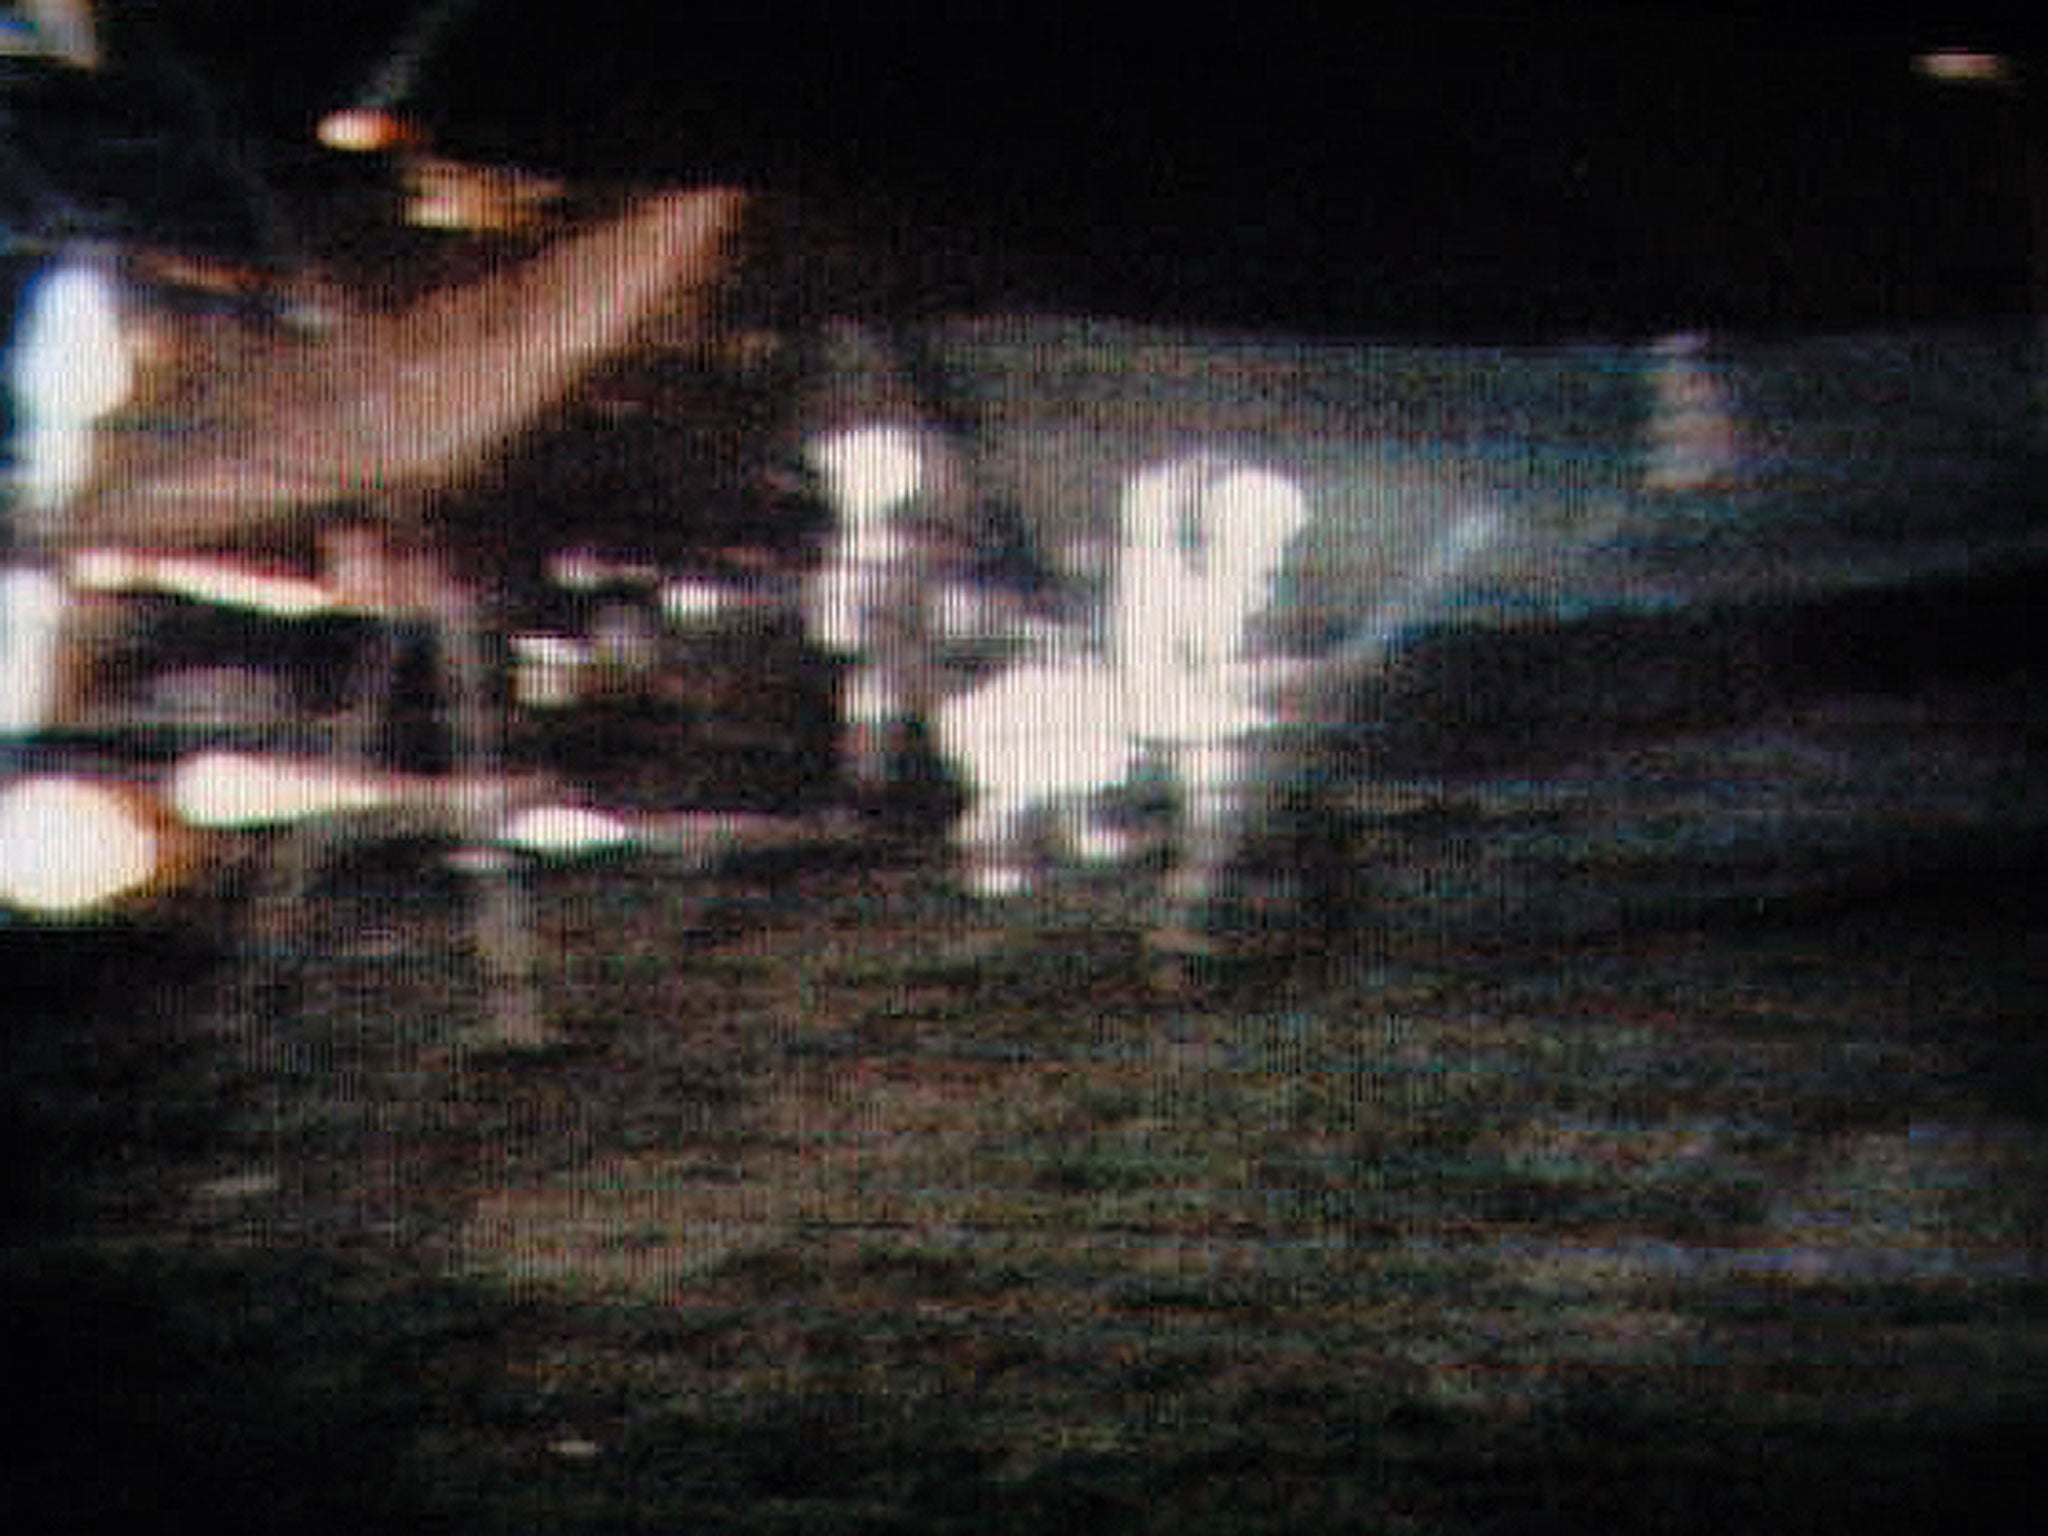 Apollo 14 commander Alan Shepard is seen playing golf on the moon in 1971